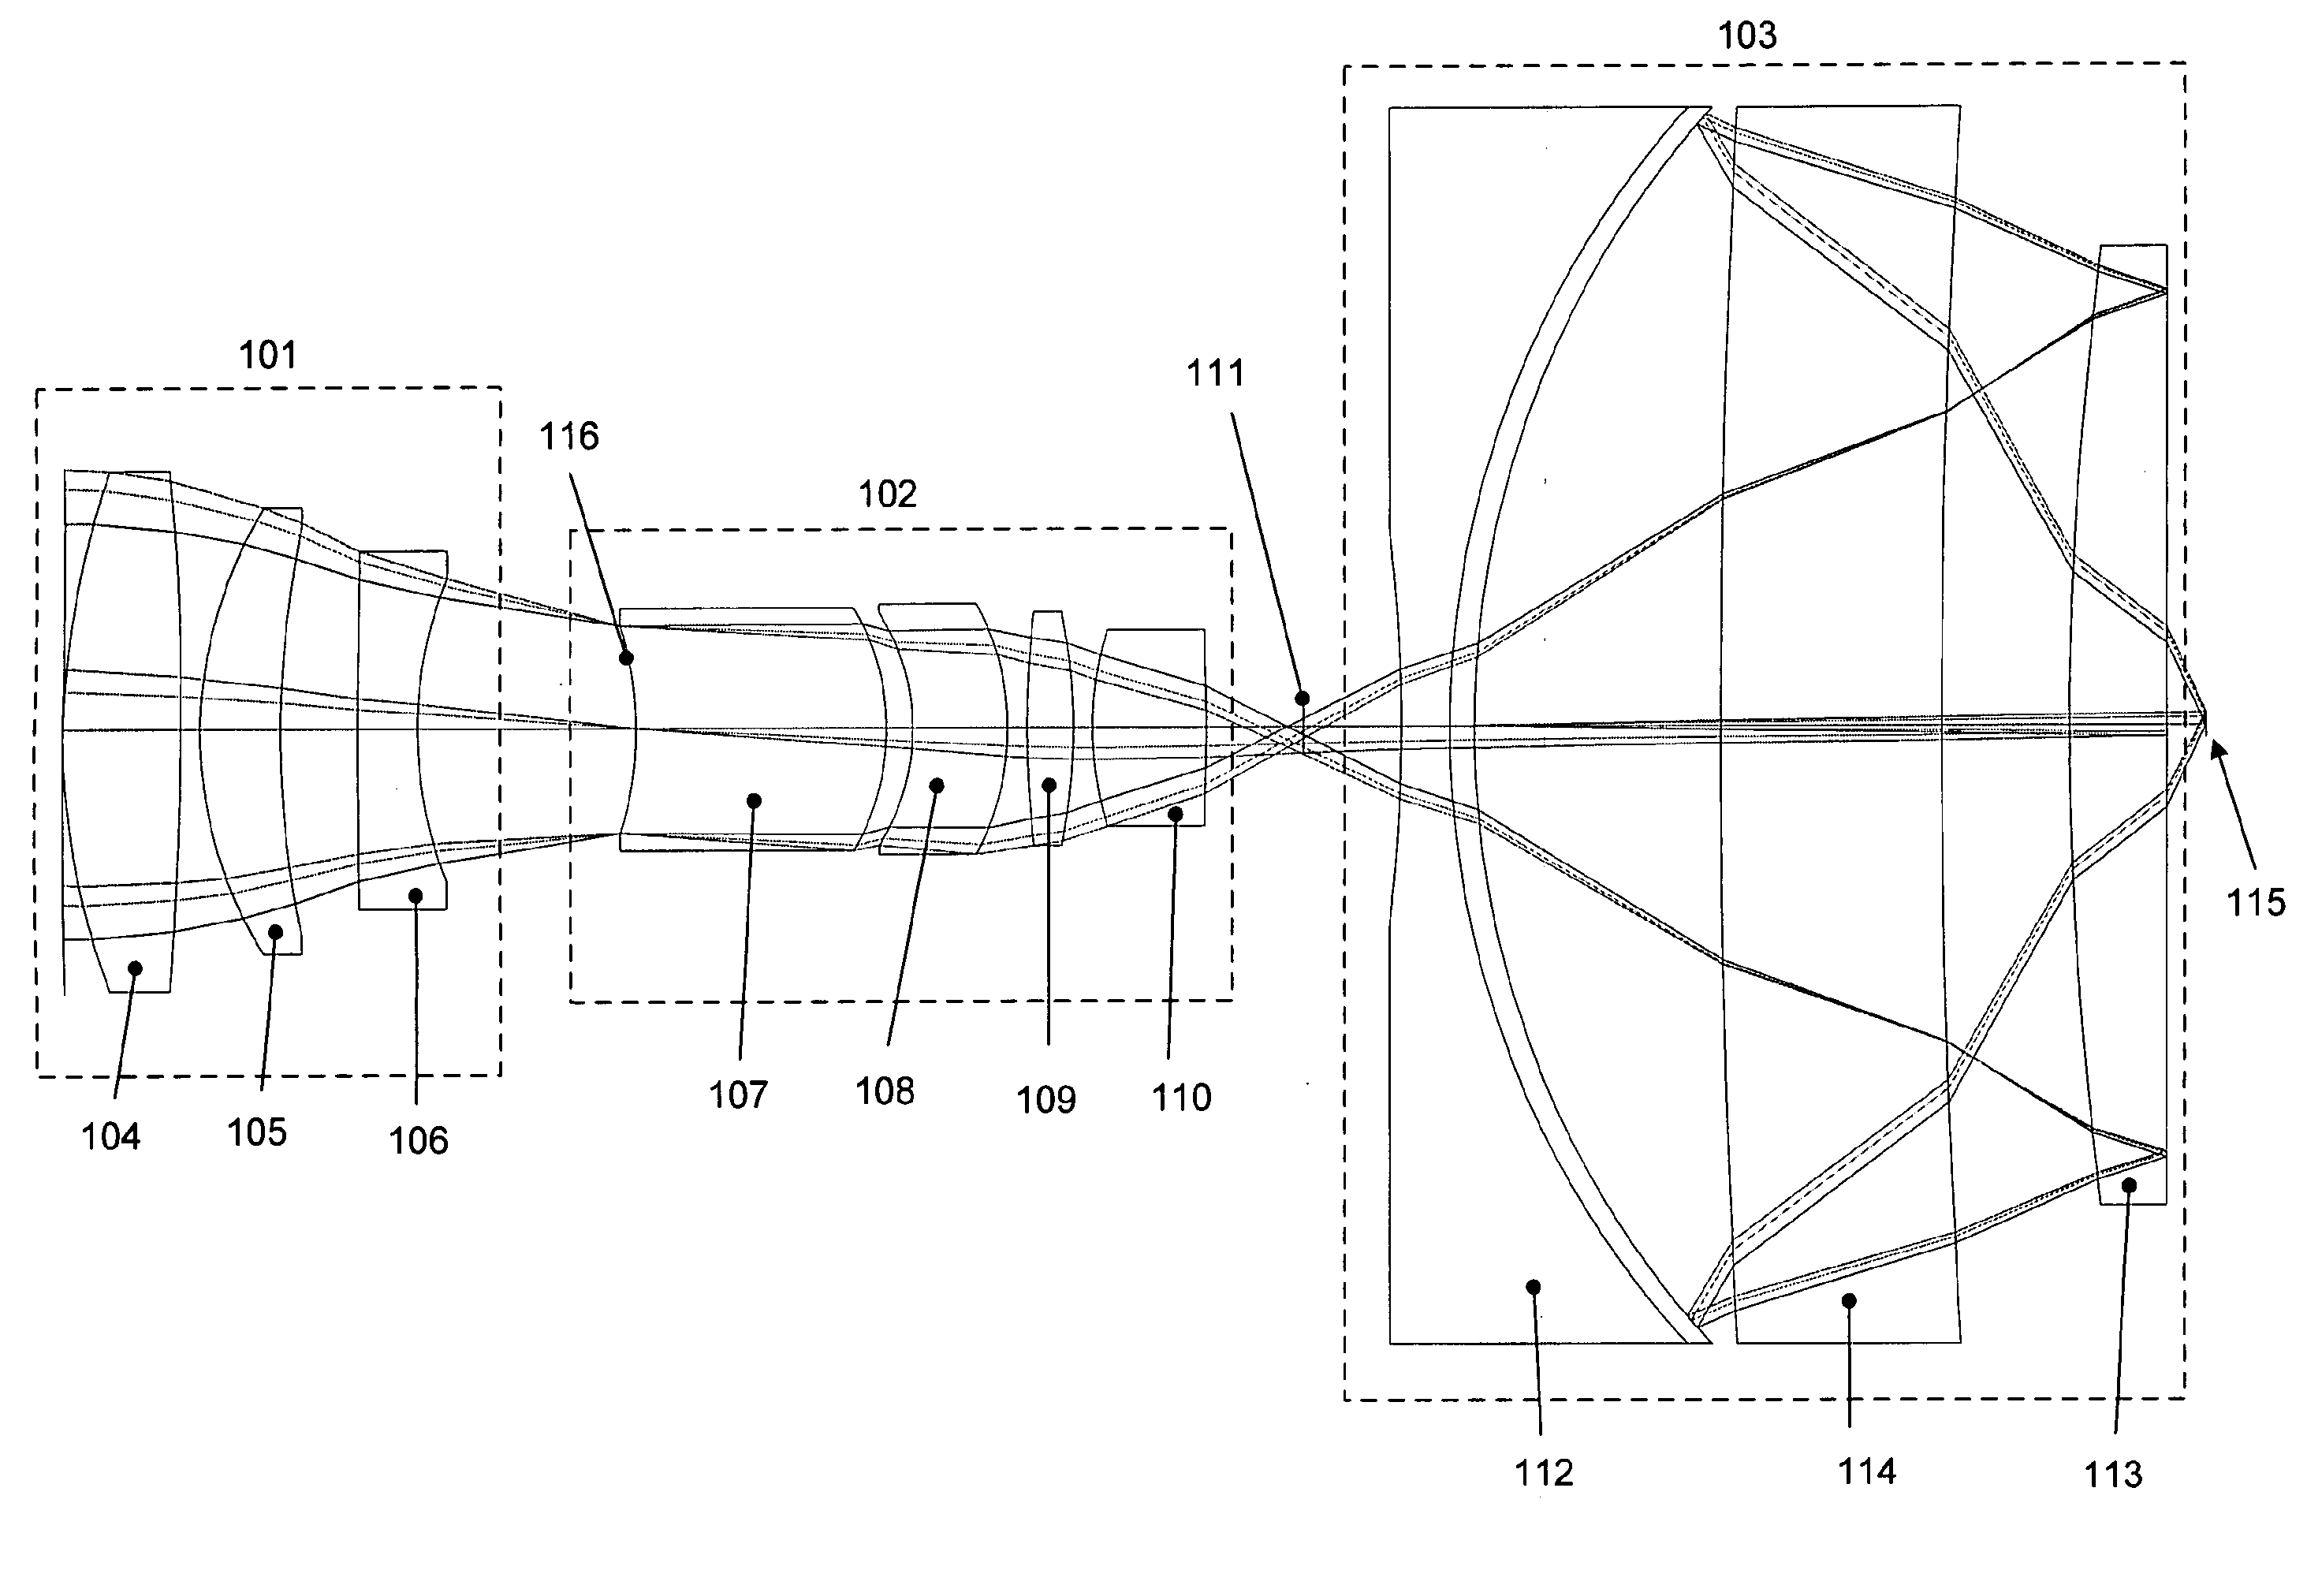 External beam delivery system using catadioptric objective with aspheric surfaces